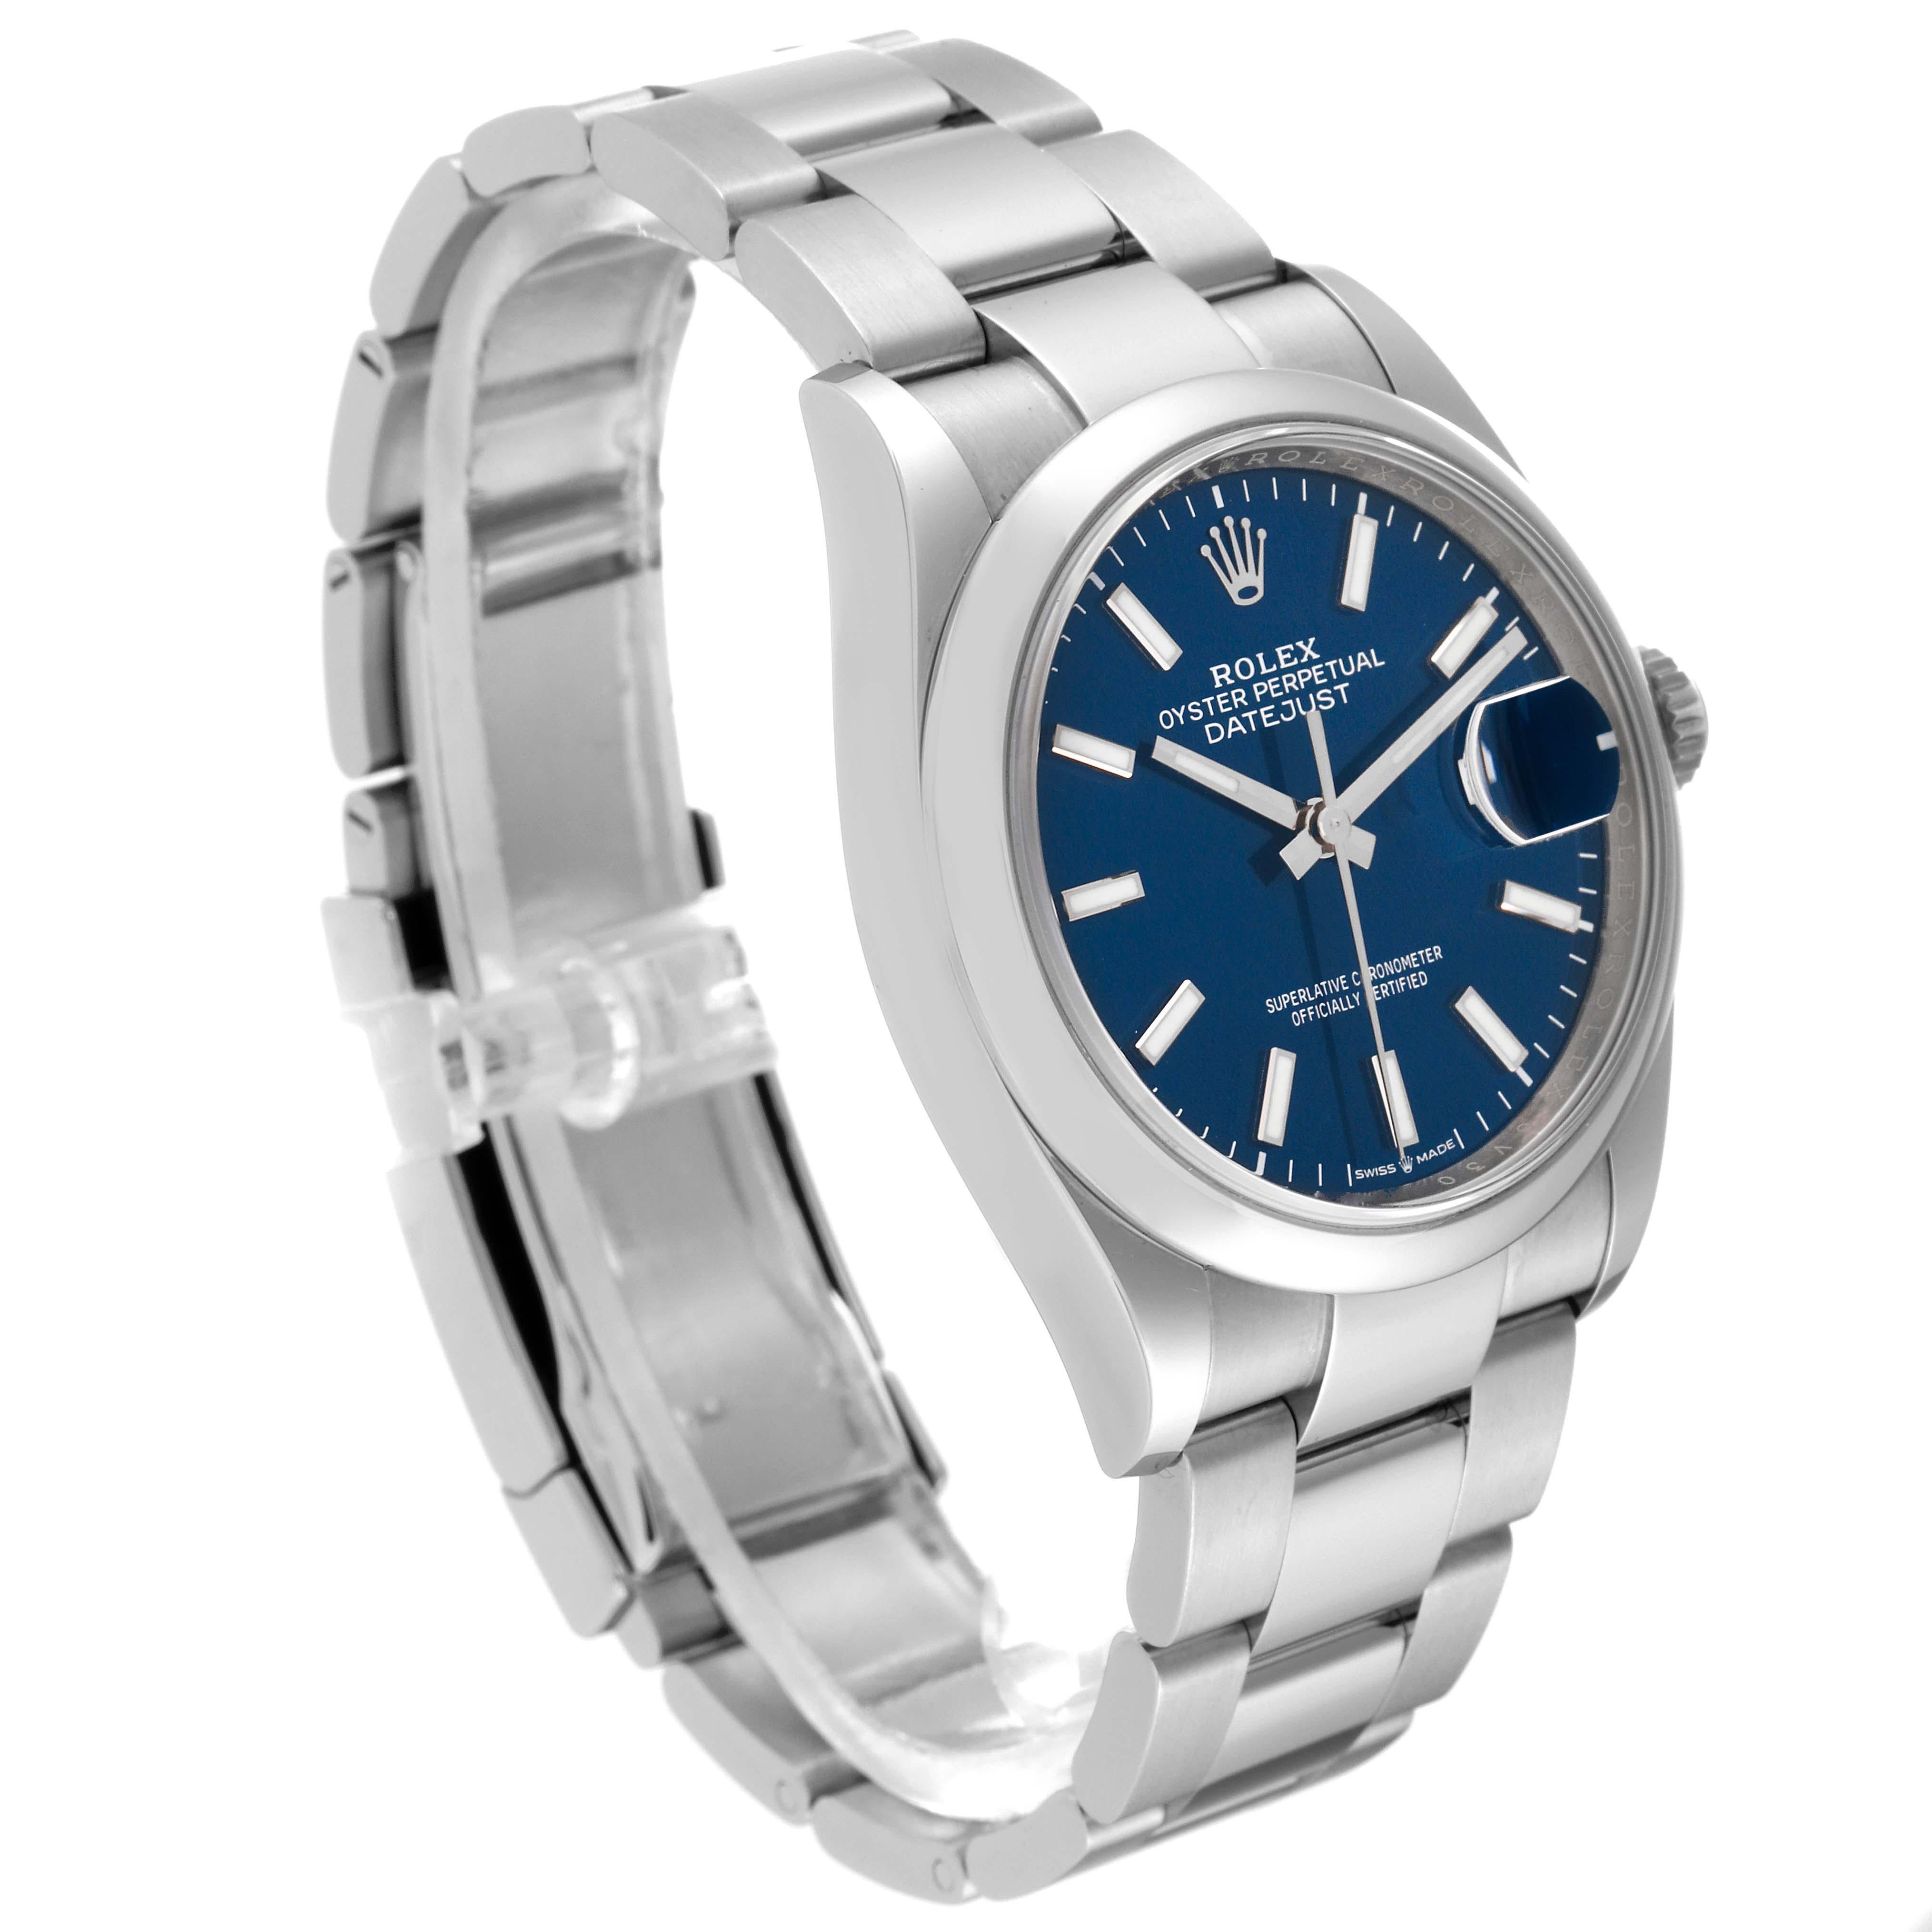 Rolex Datejust 36 Blue Dial Domed Bezel Steel Mens Watch 126200 Card. Officially certified chronometer automatic self-winding movement. Stainless steel case 36.0 mm in diameter. Rolex logo on a crown. Stainless steel smooth domed bezel. Scratch